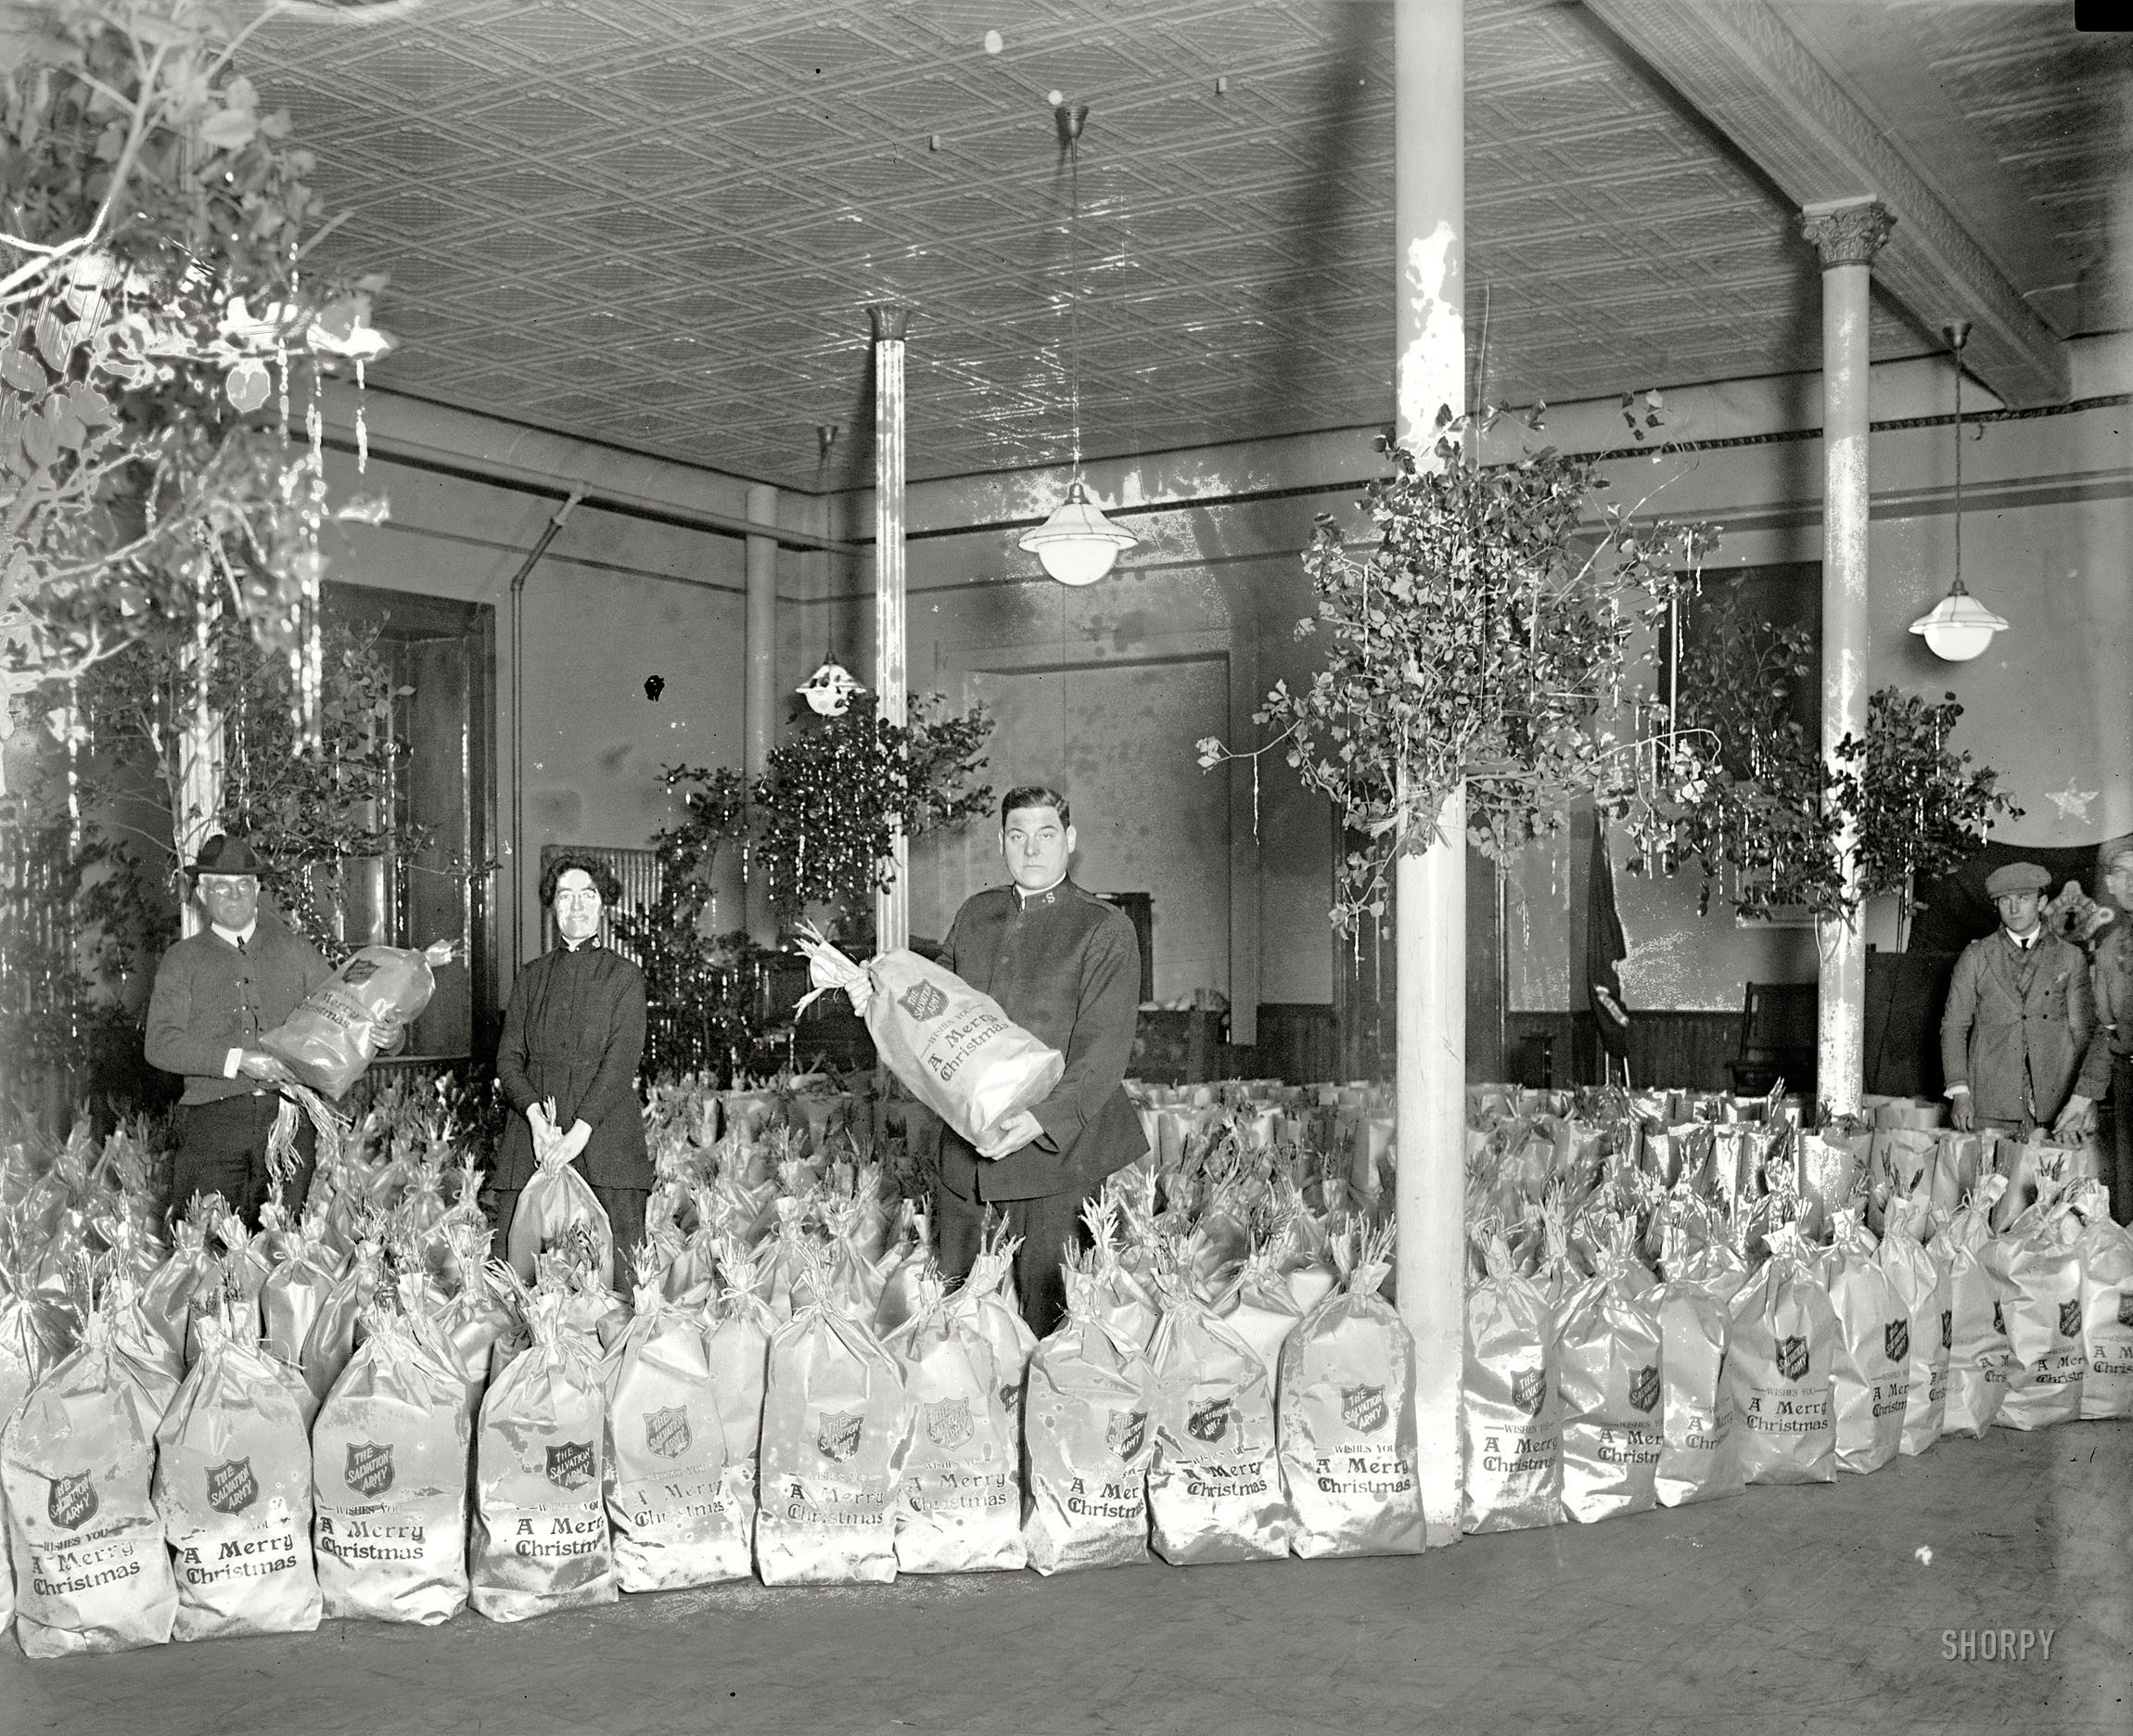 December 24, 1924. Washington, D.C. "Xmas bags distributed by Salvation Army." An addition to the tableau glimpsed here last week. Protruding from the top of each goody bag: A festive spray of chicken feet. View full size.